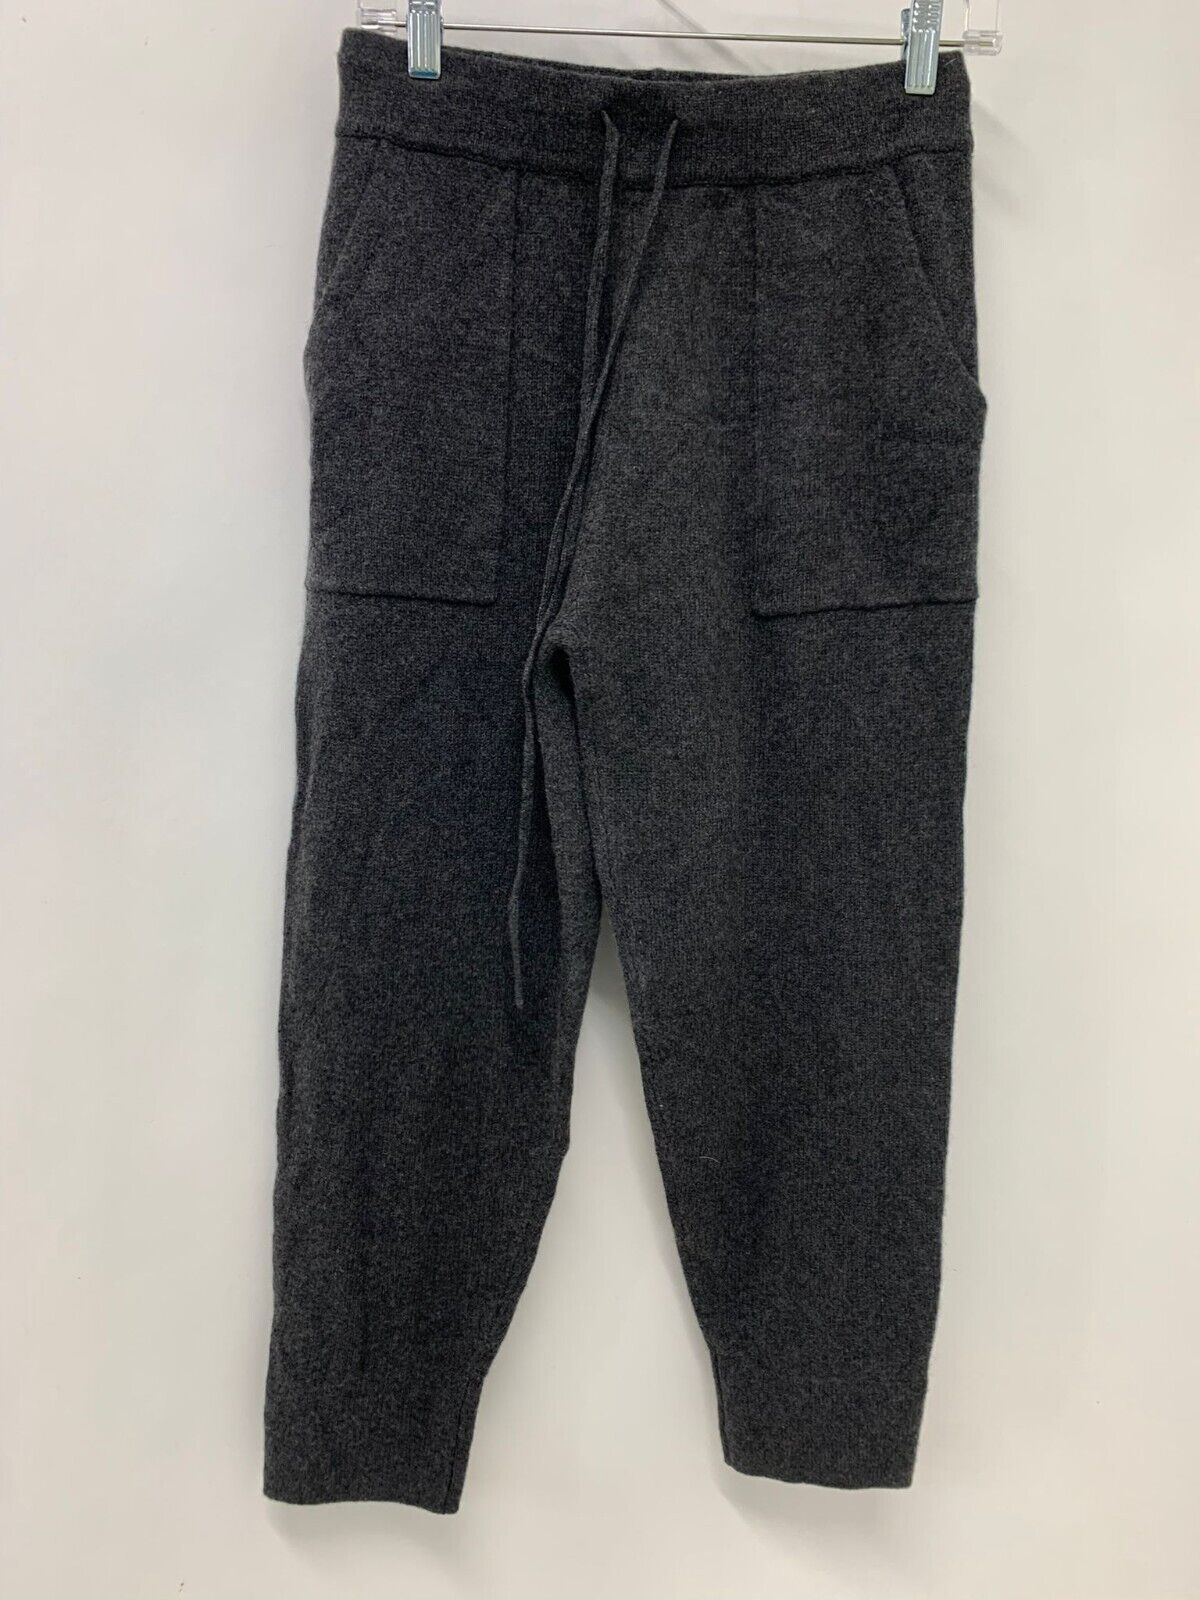 Outerknown Womens XS Hudson Joggers Pants Cashmere Dark Gray Charcoal